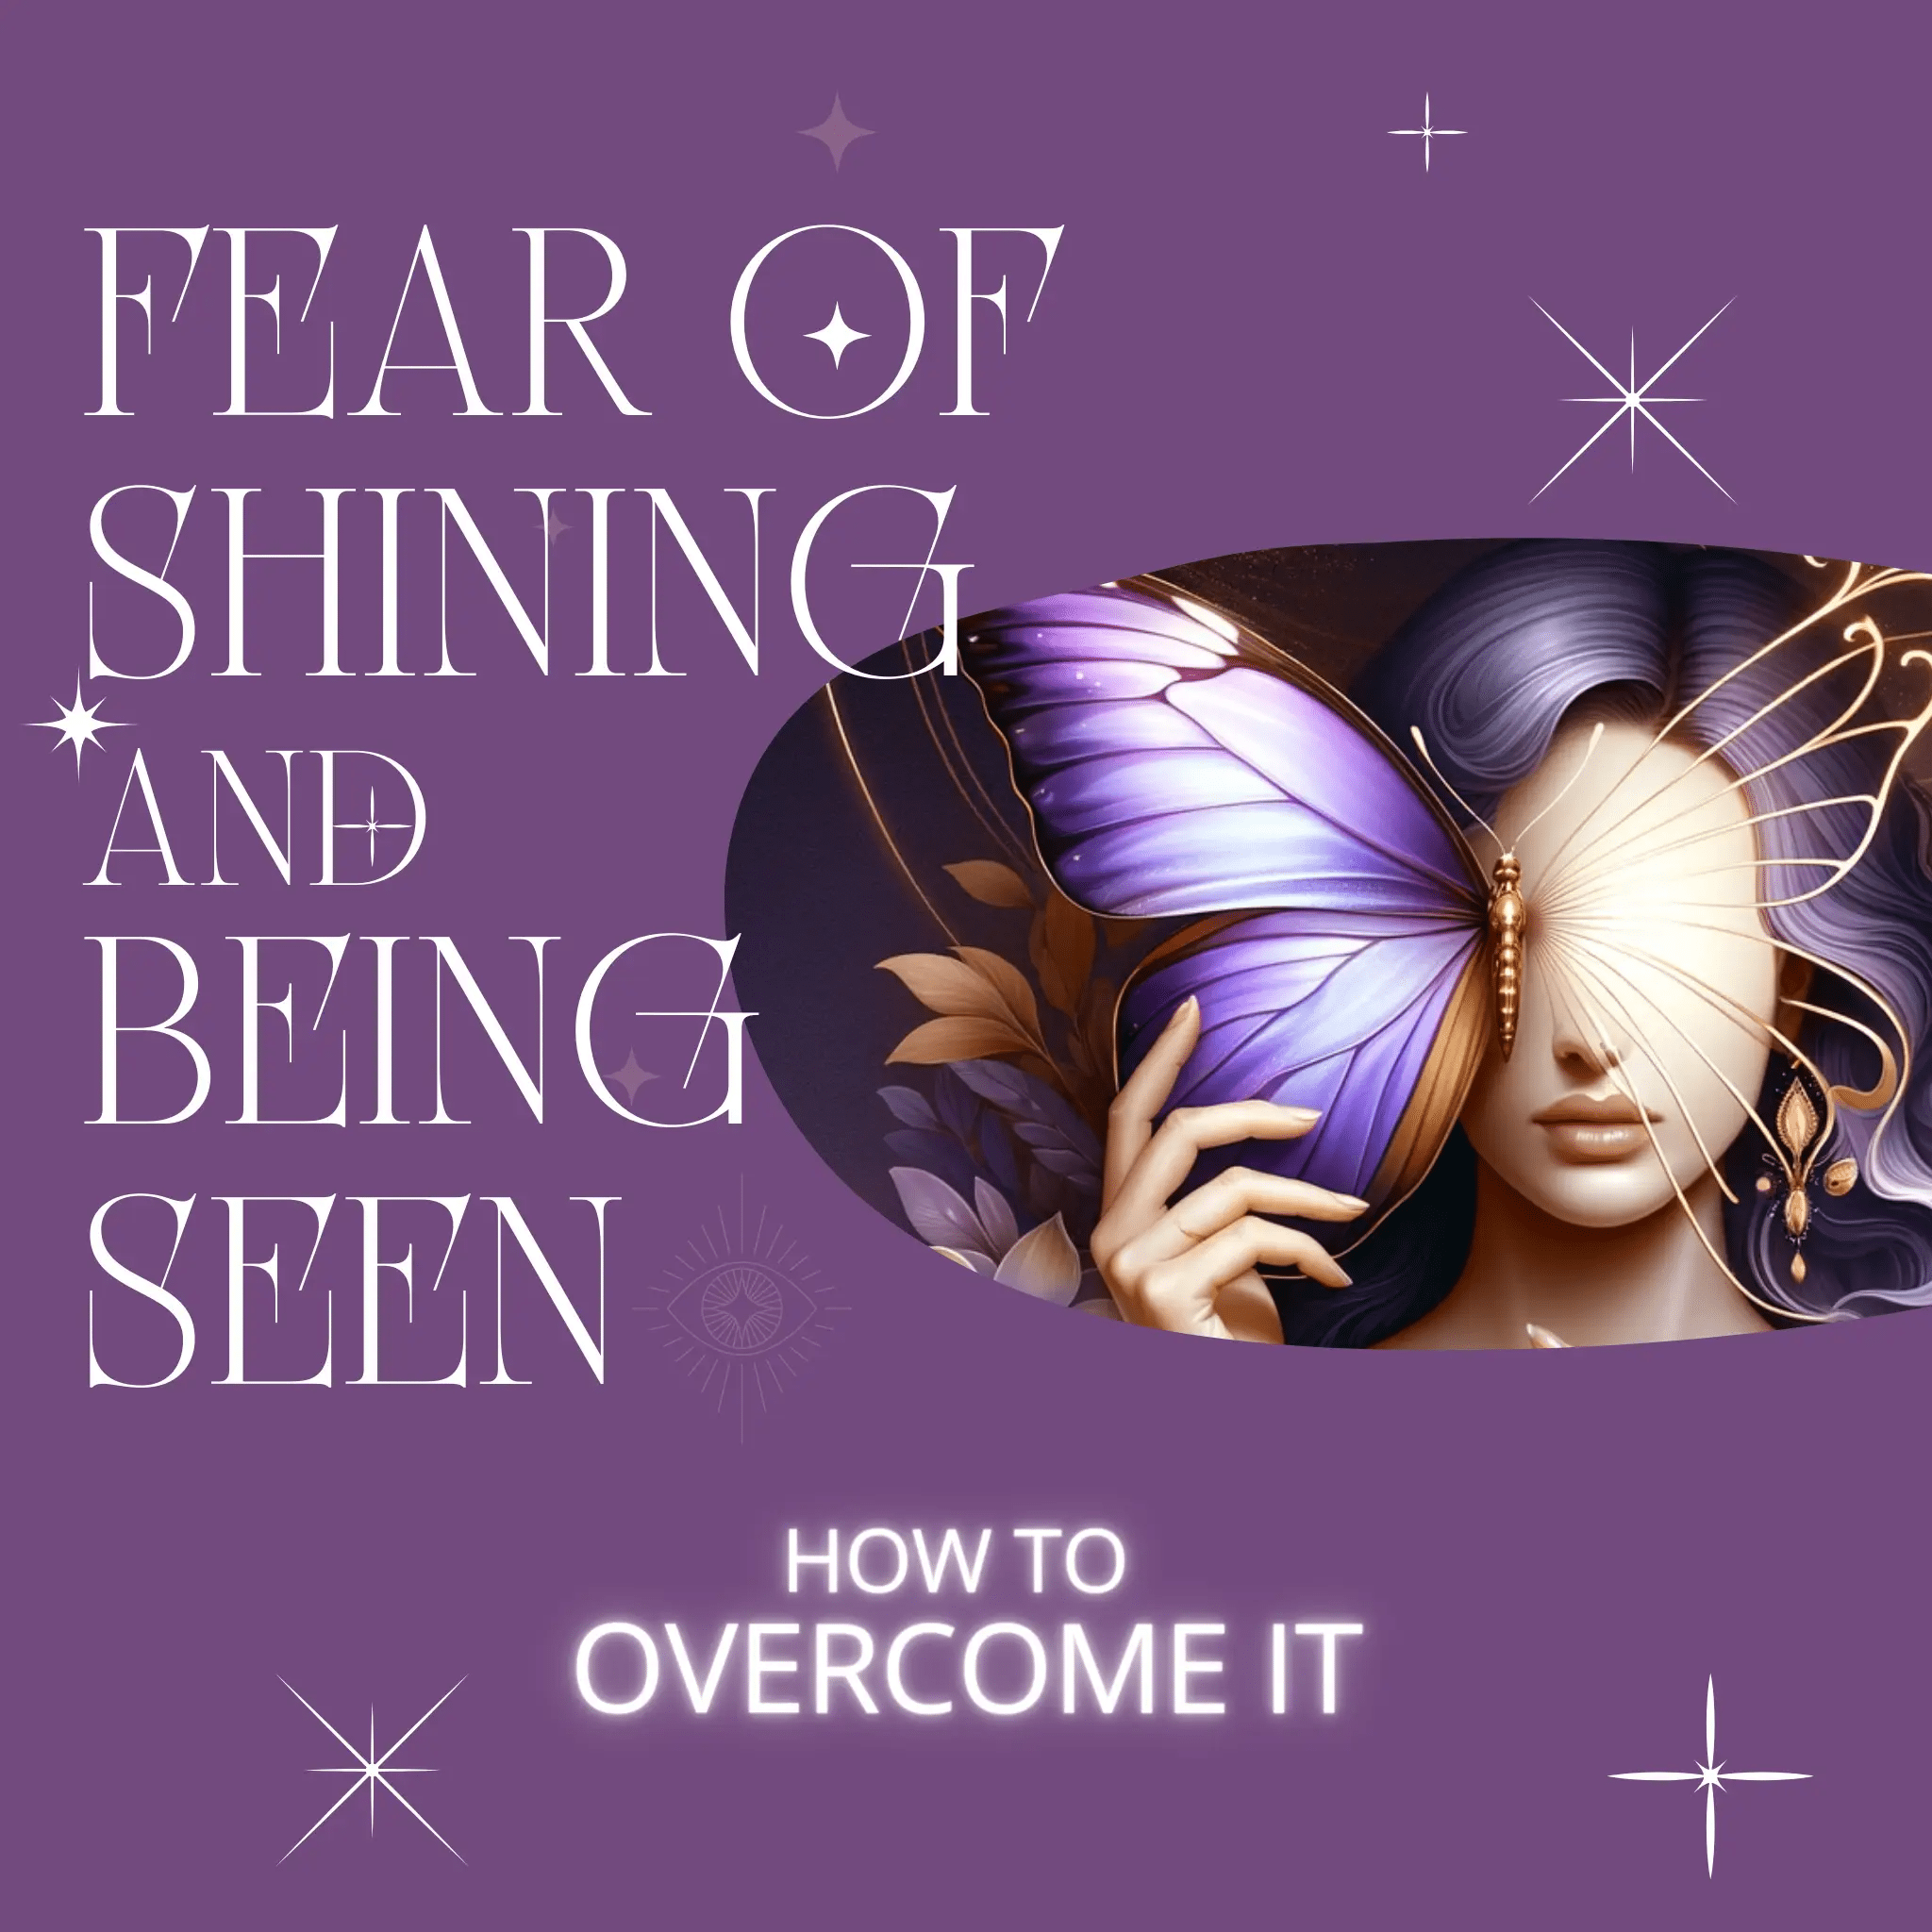 Calmoura Digital Fear of Shining and Being Seen in this World - How to Overcome It